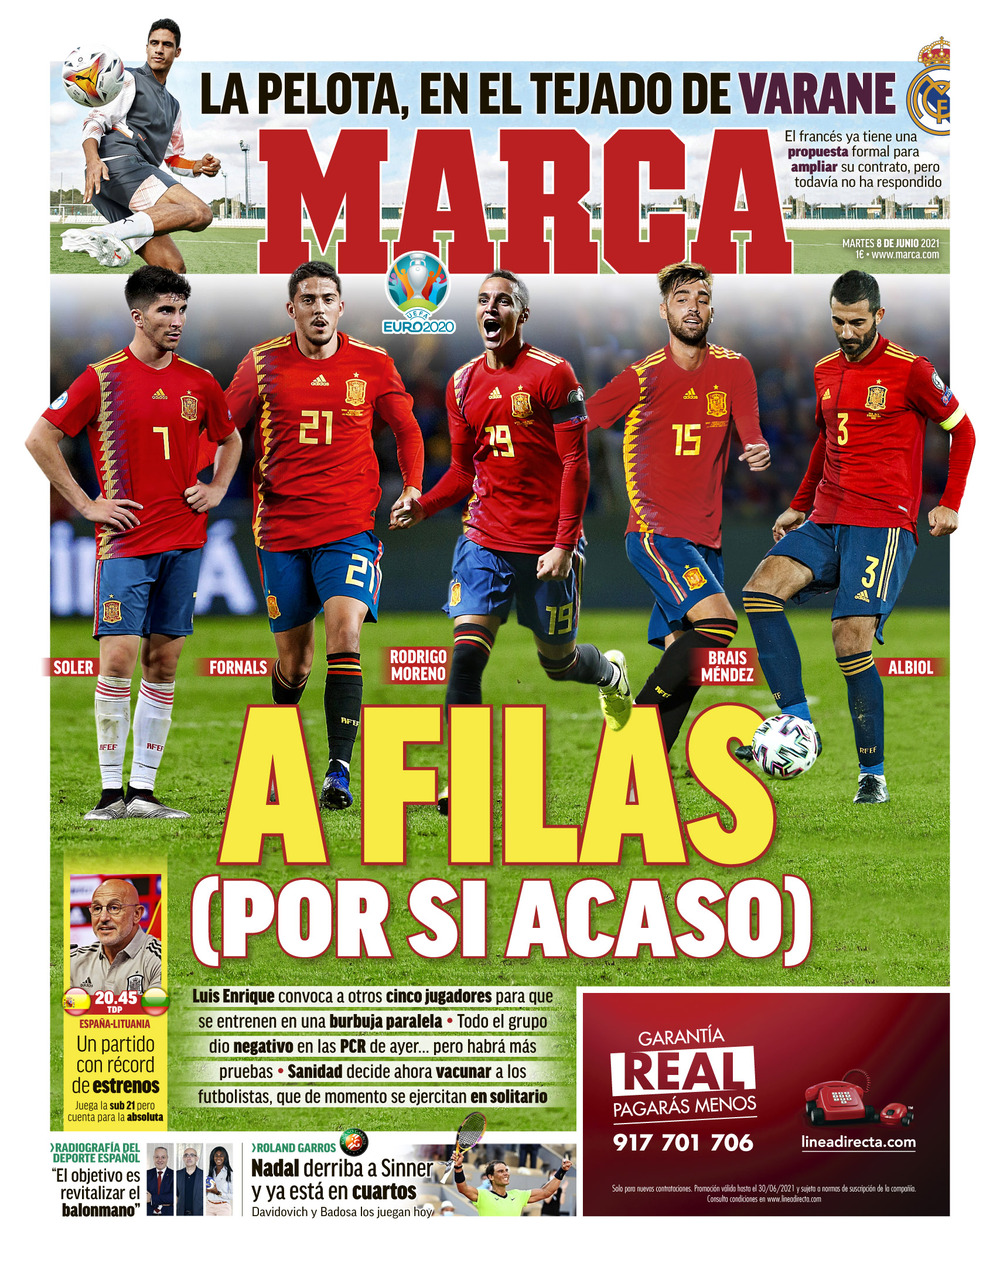 Today S Spanish Papers Luis Enrique Calls Up Reinforcements To His Spain Squad And Pep Guardiola Backs Barcelona Boss Ronald Koeman Football Espana